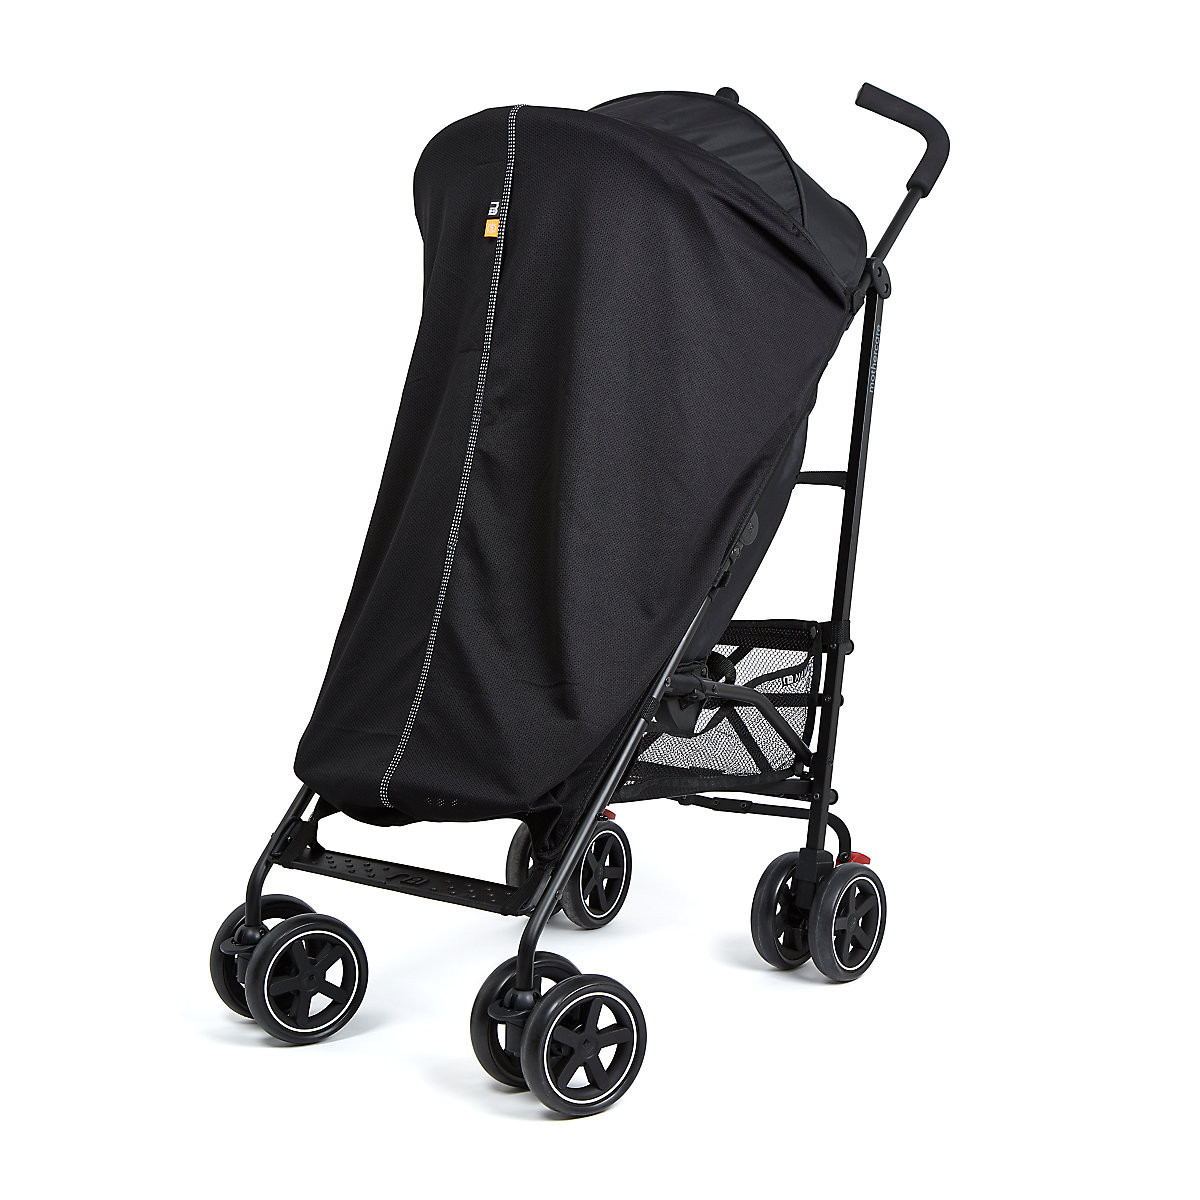 mothercare stroller accessories